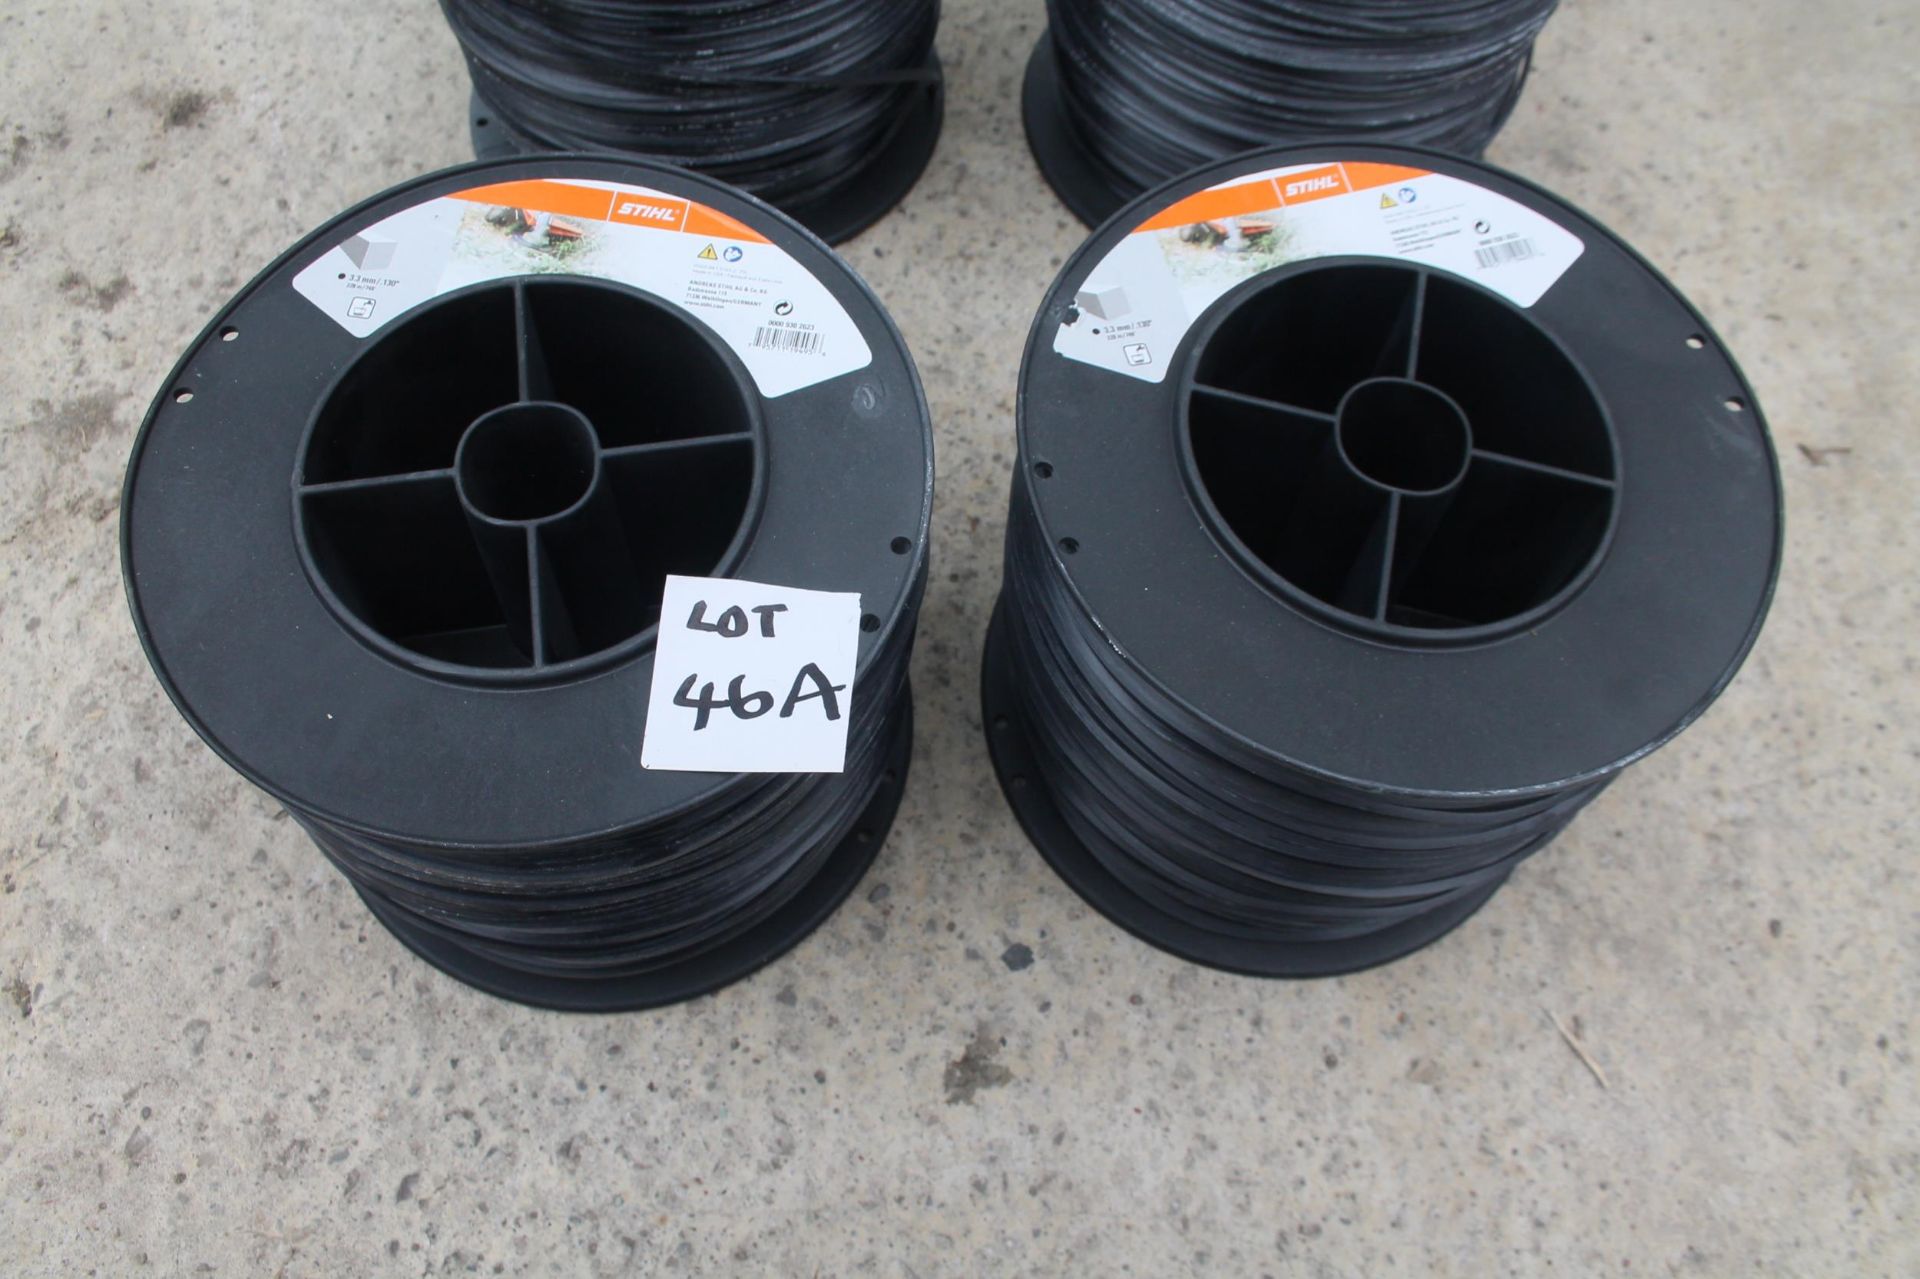 TWO ROLLS OF NEW STHIL 3.3MM STRIMMER CORD, EACH ROLL CONTAINING 228M OF CORD NO VAT